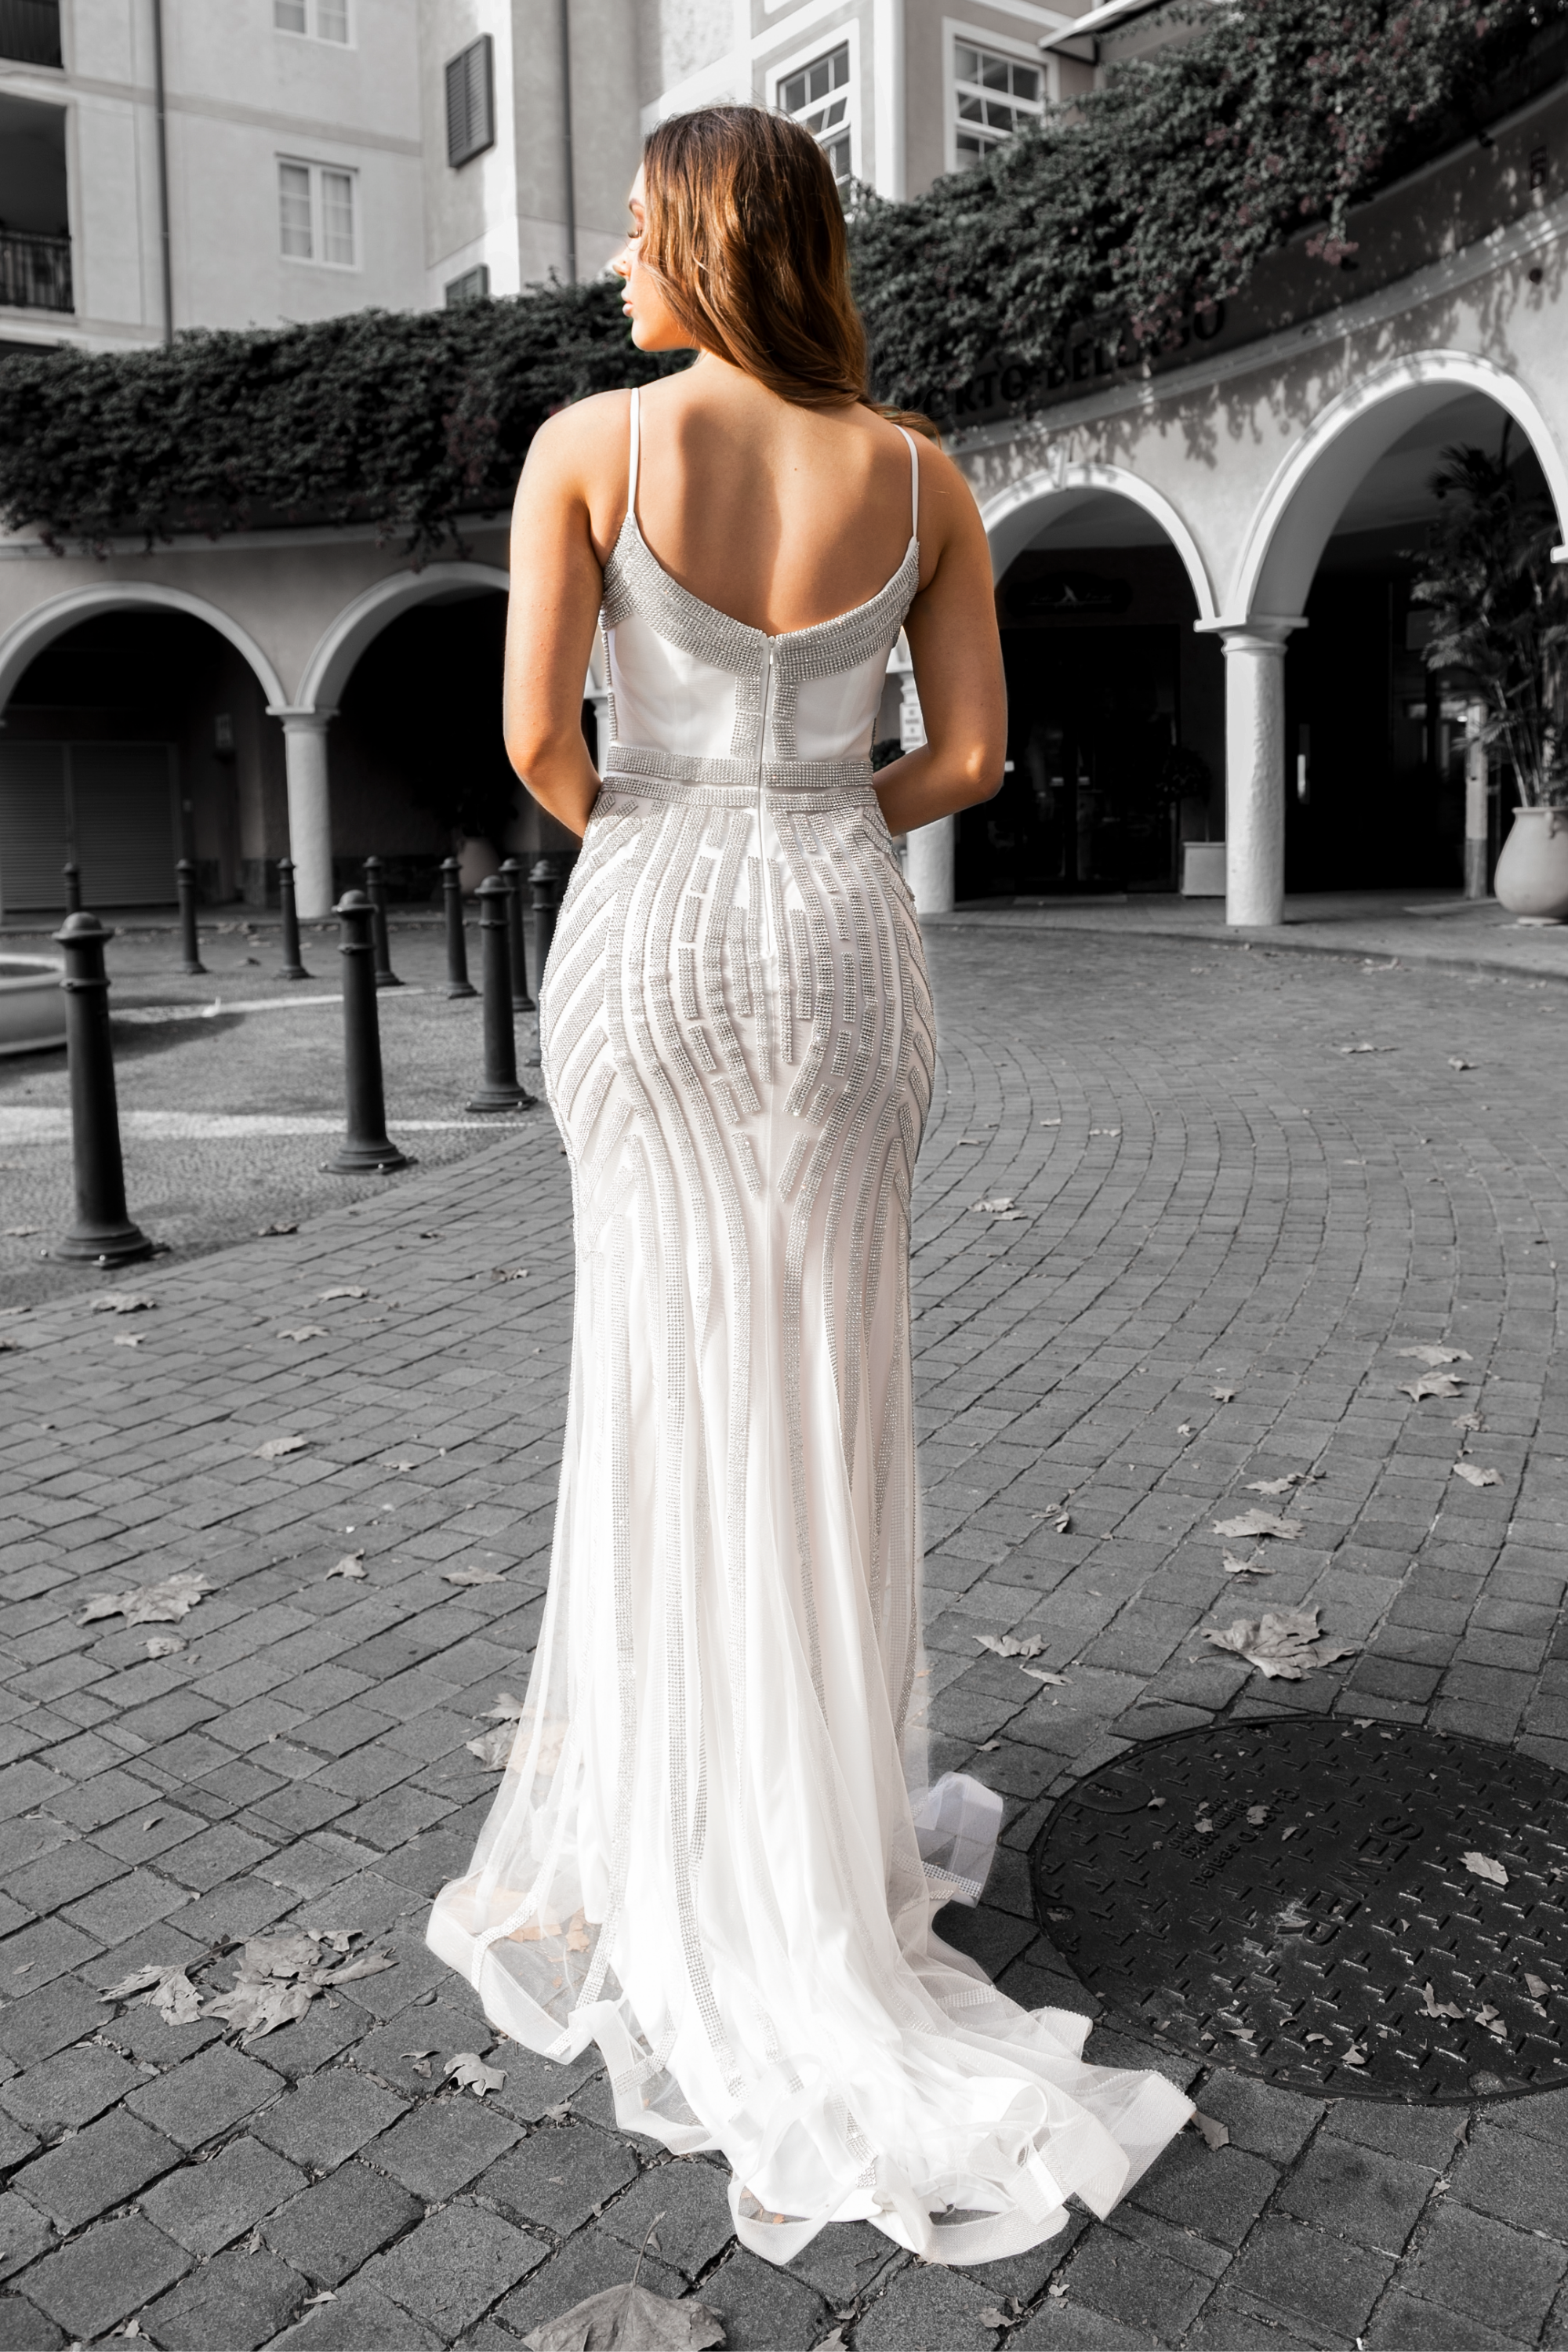 Honey Couture DIAMONDS White Sequin Mermaid Formal Wedding Gown Dress Private Label$ AfterPay Humm ZipPay LayBuy Sezzle